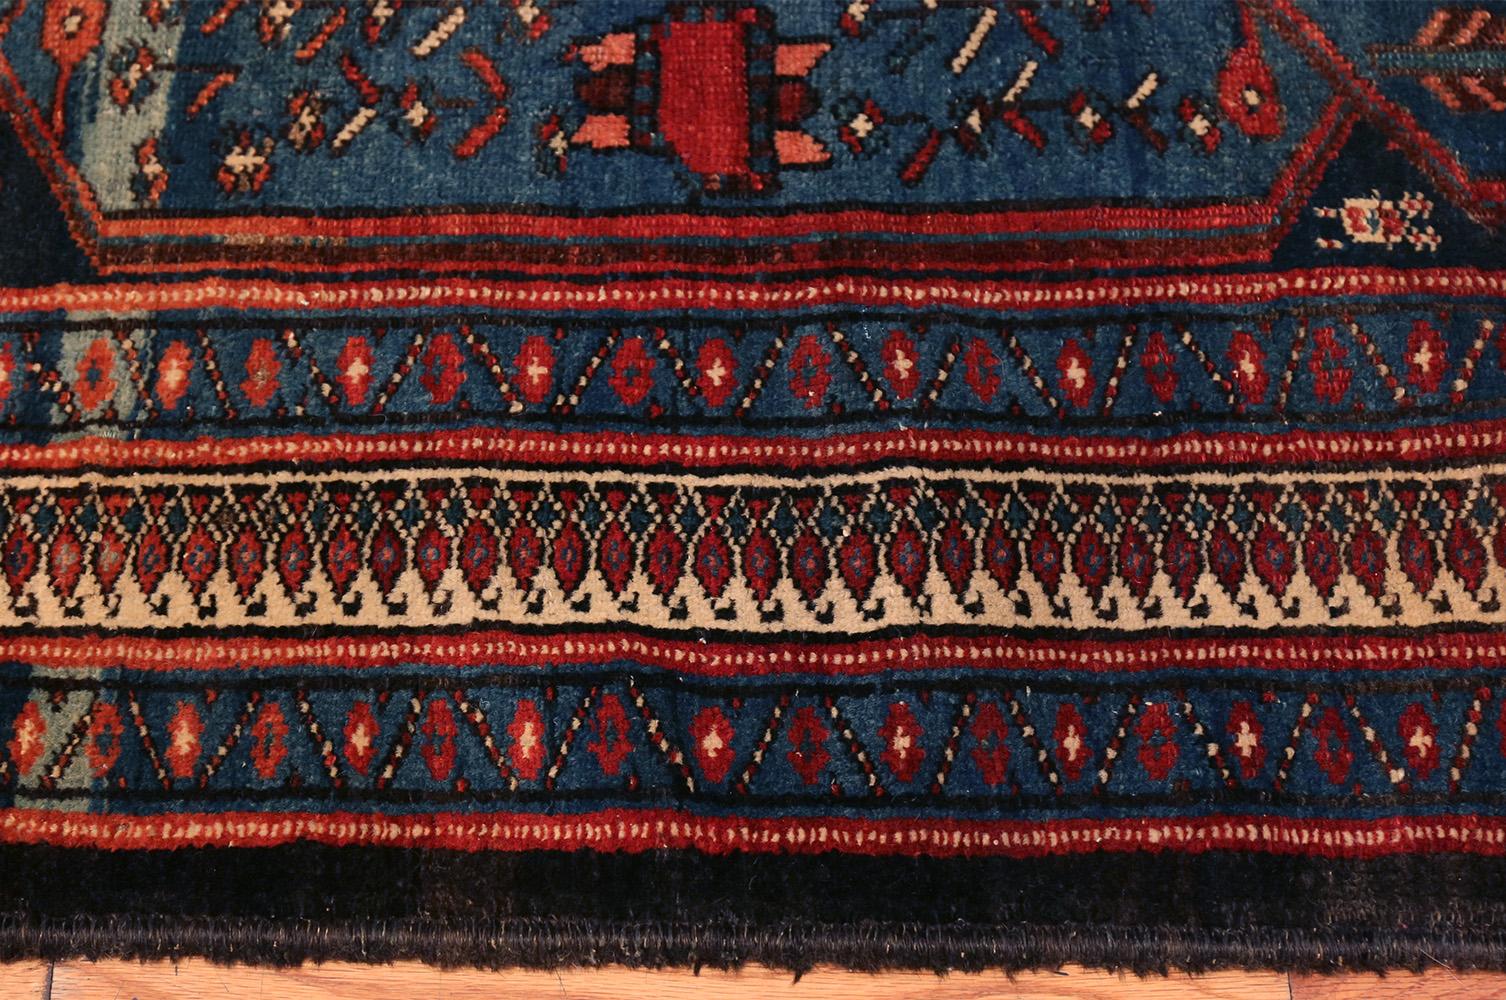 Breathtaking Small Size Antique Persian Malayer Rug, Country of Origin / Rug Type: Persian Rug, Circa Date: 1900 - Size: 4 ft 7 in x 6 ft 5 in (1.4 m x 1.96 m).